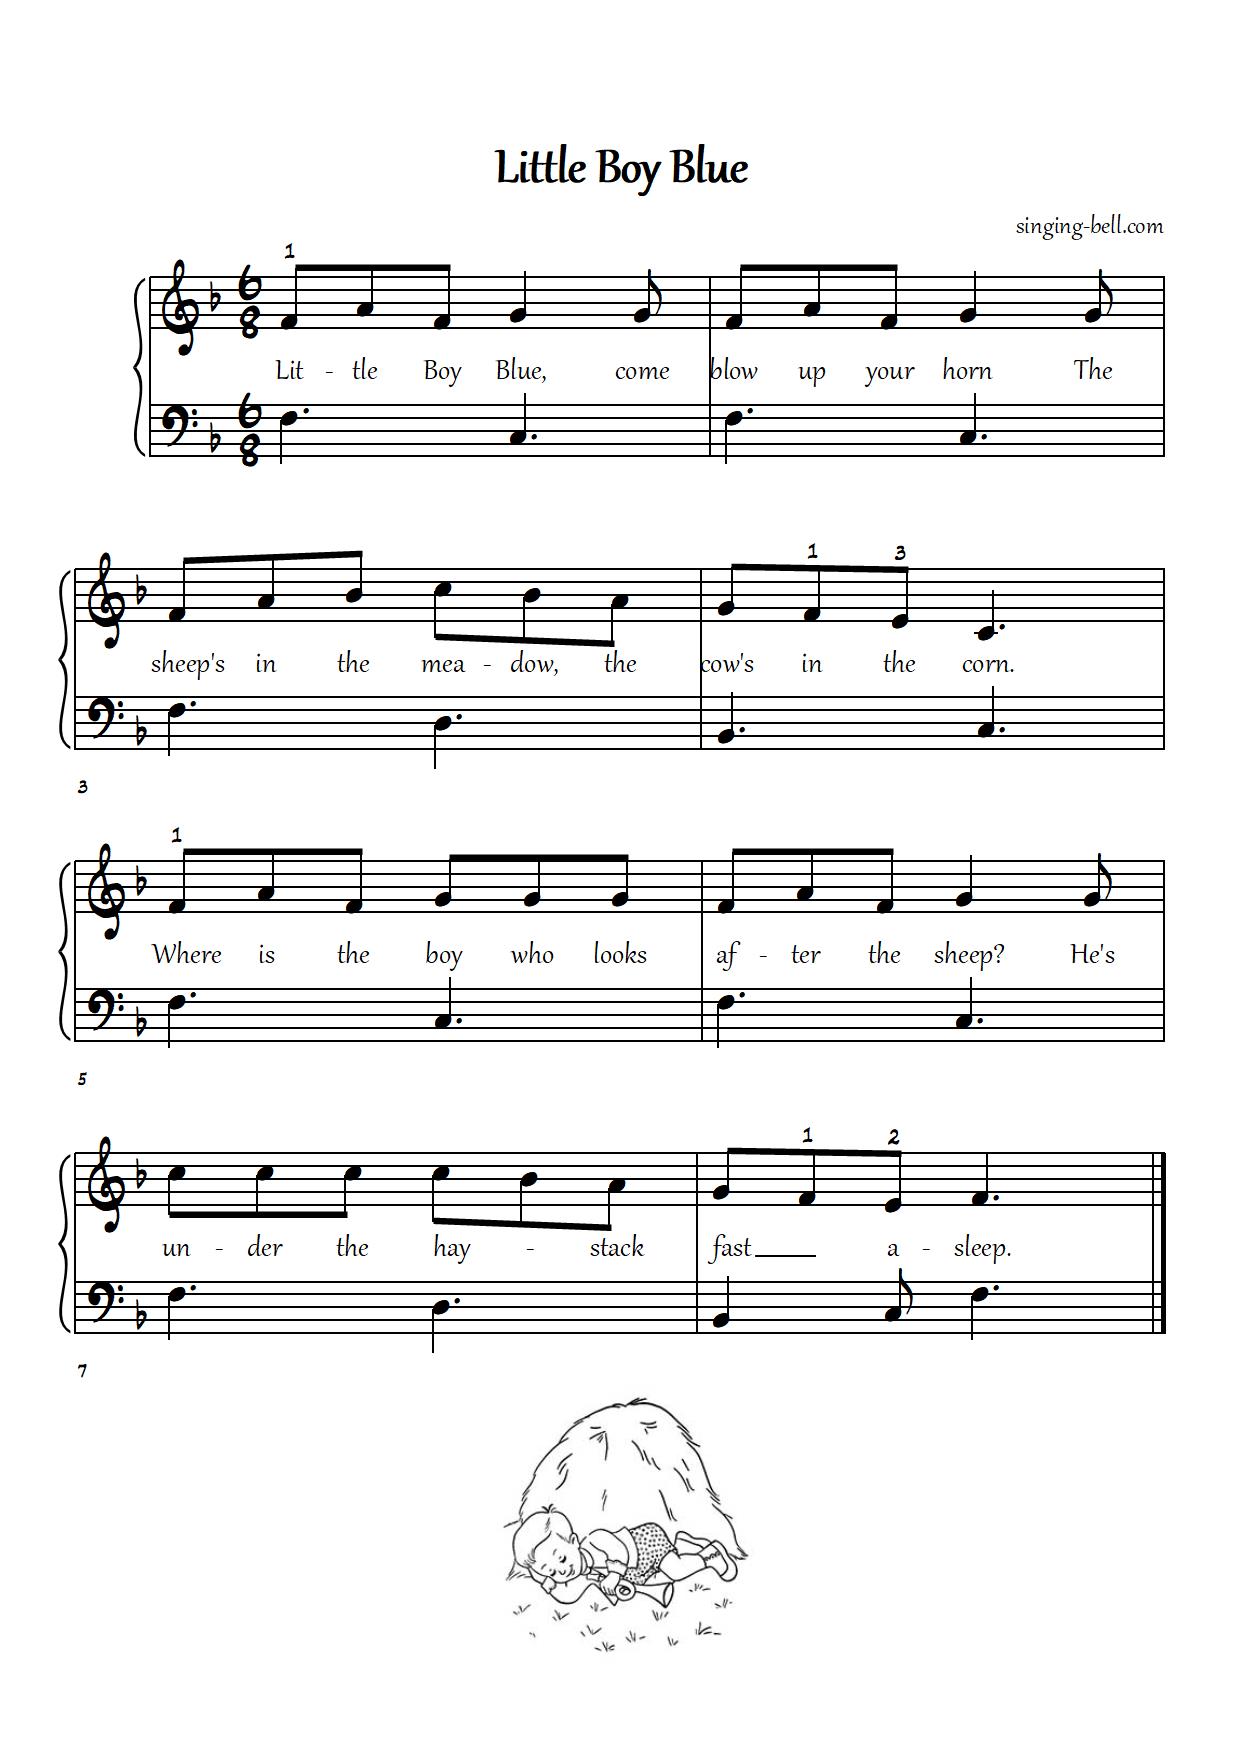 Little Boy Blue easy piano sheet music notes chords beginners pdf